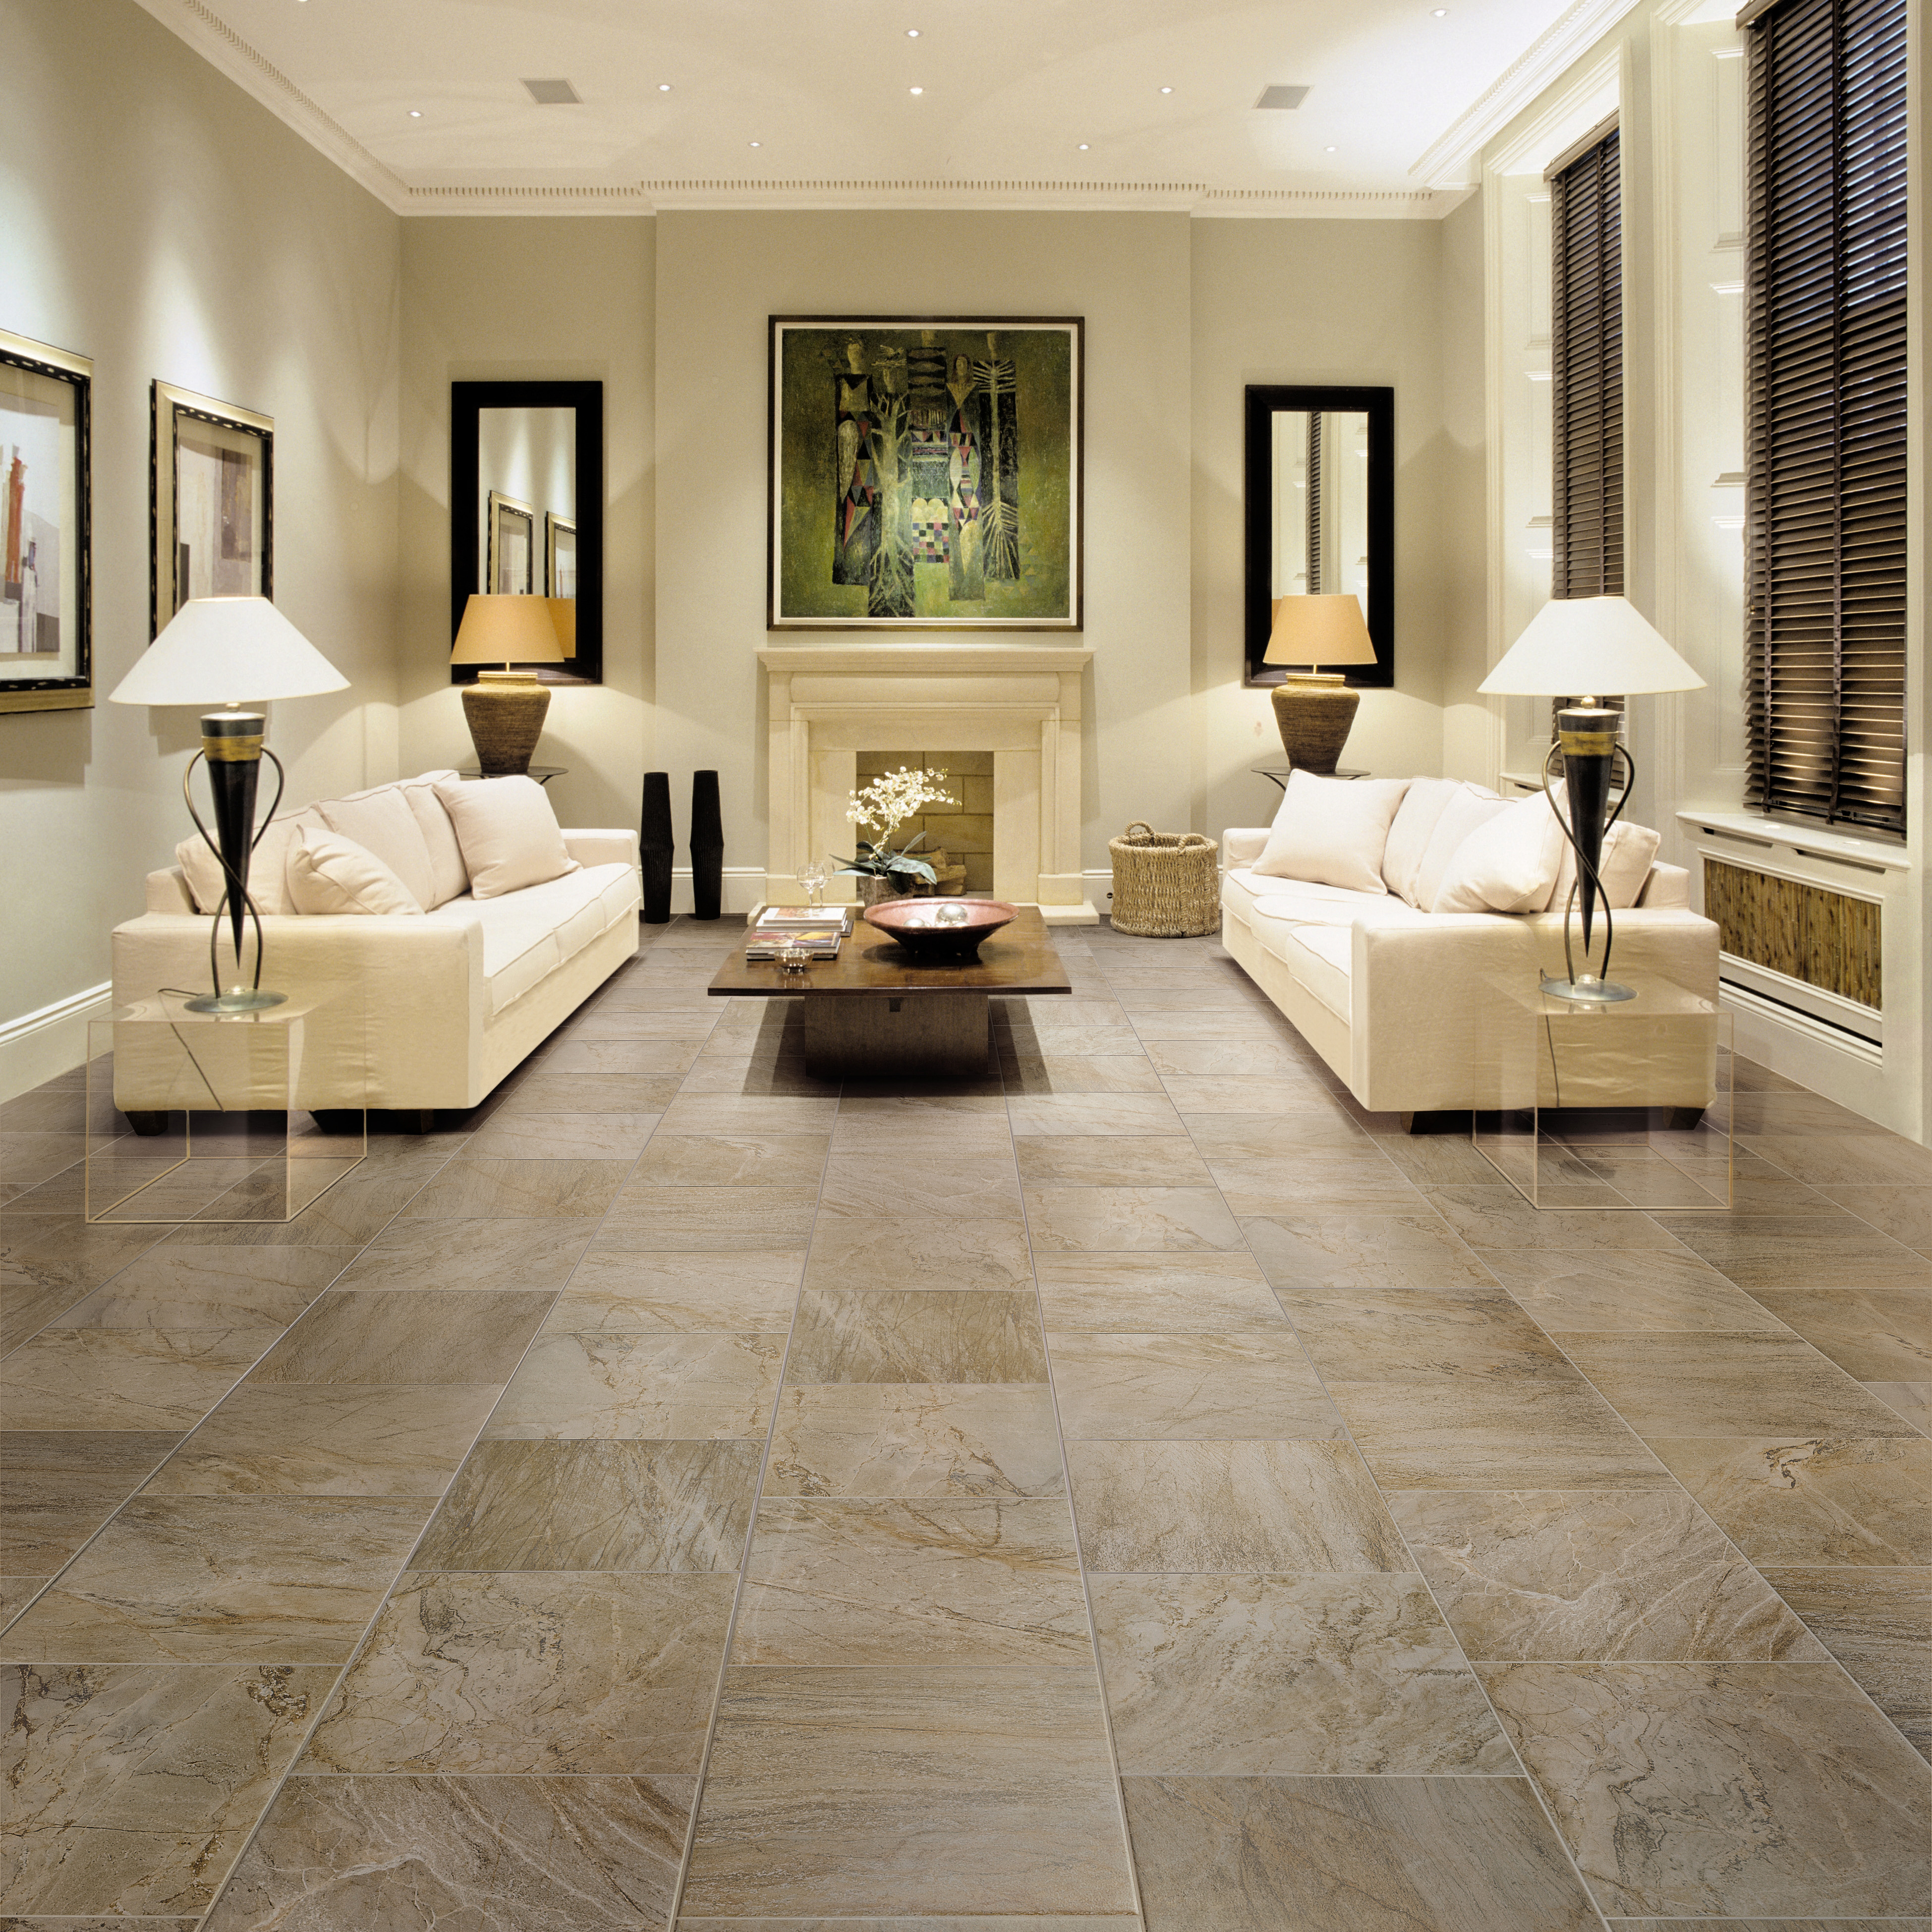 Does Luxury Vinyl Tile Flooring Require Grout 2? 